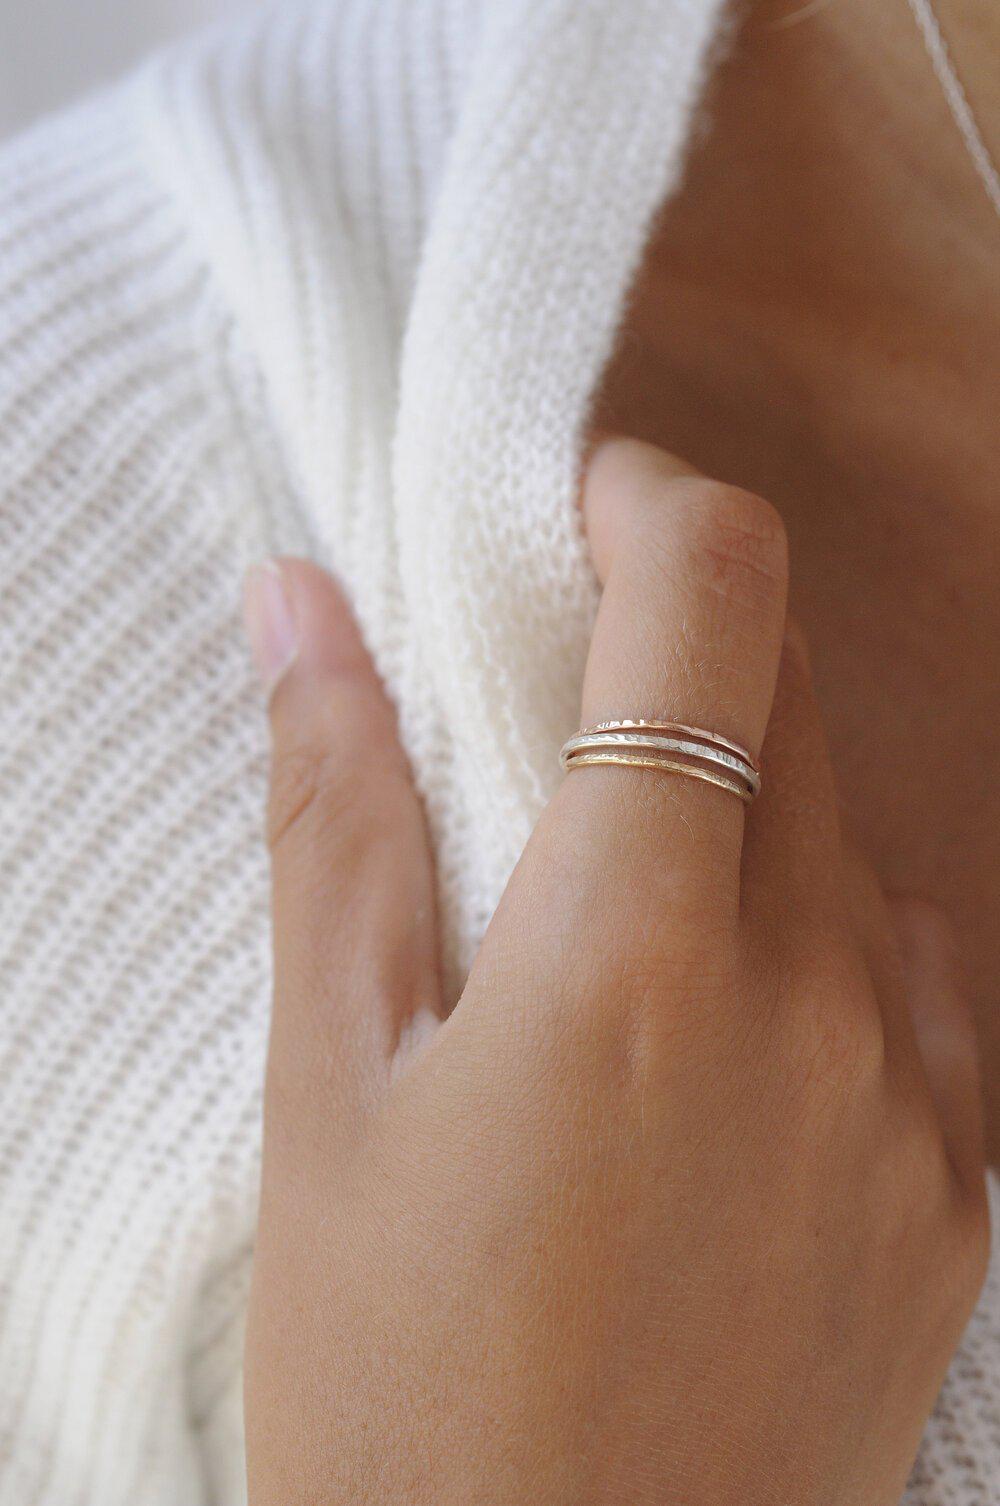 9ct-hammered-stacking-ring-wild-fawn-jewellery-2_9210be0d-13e4-4524-94b8-f6f520df7777.jpg